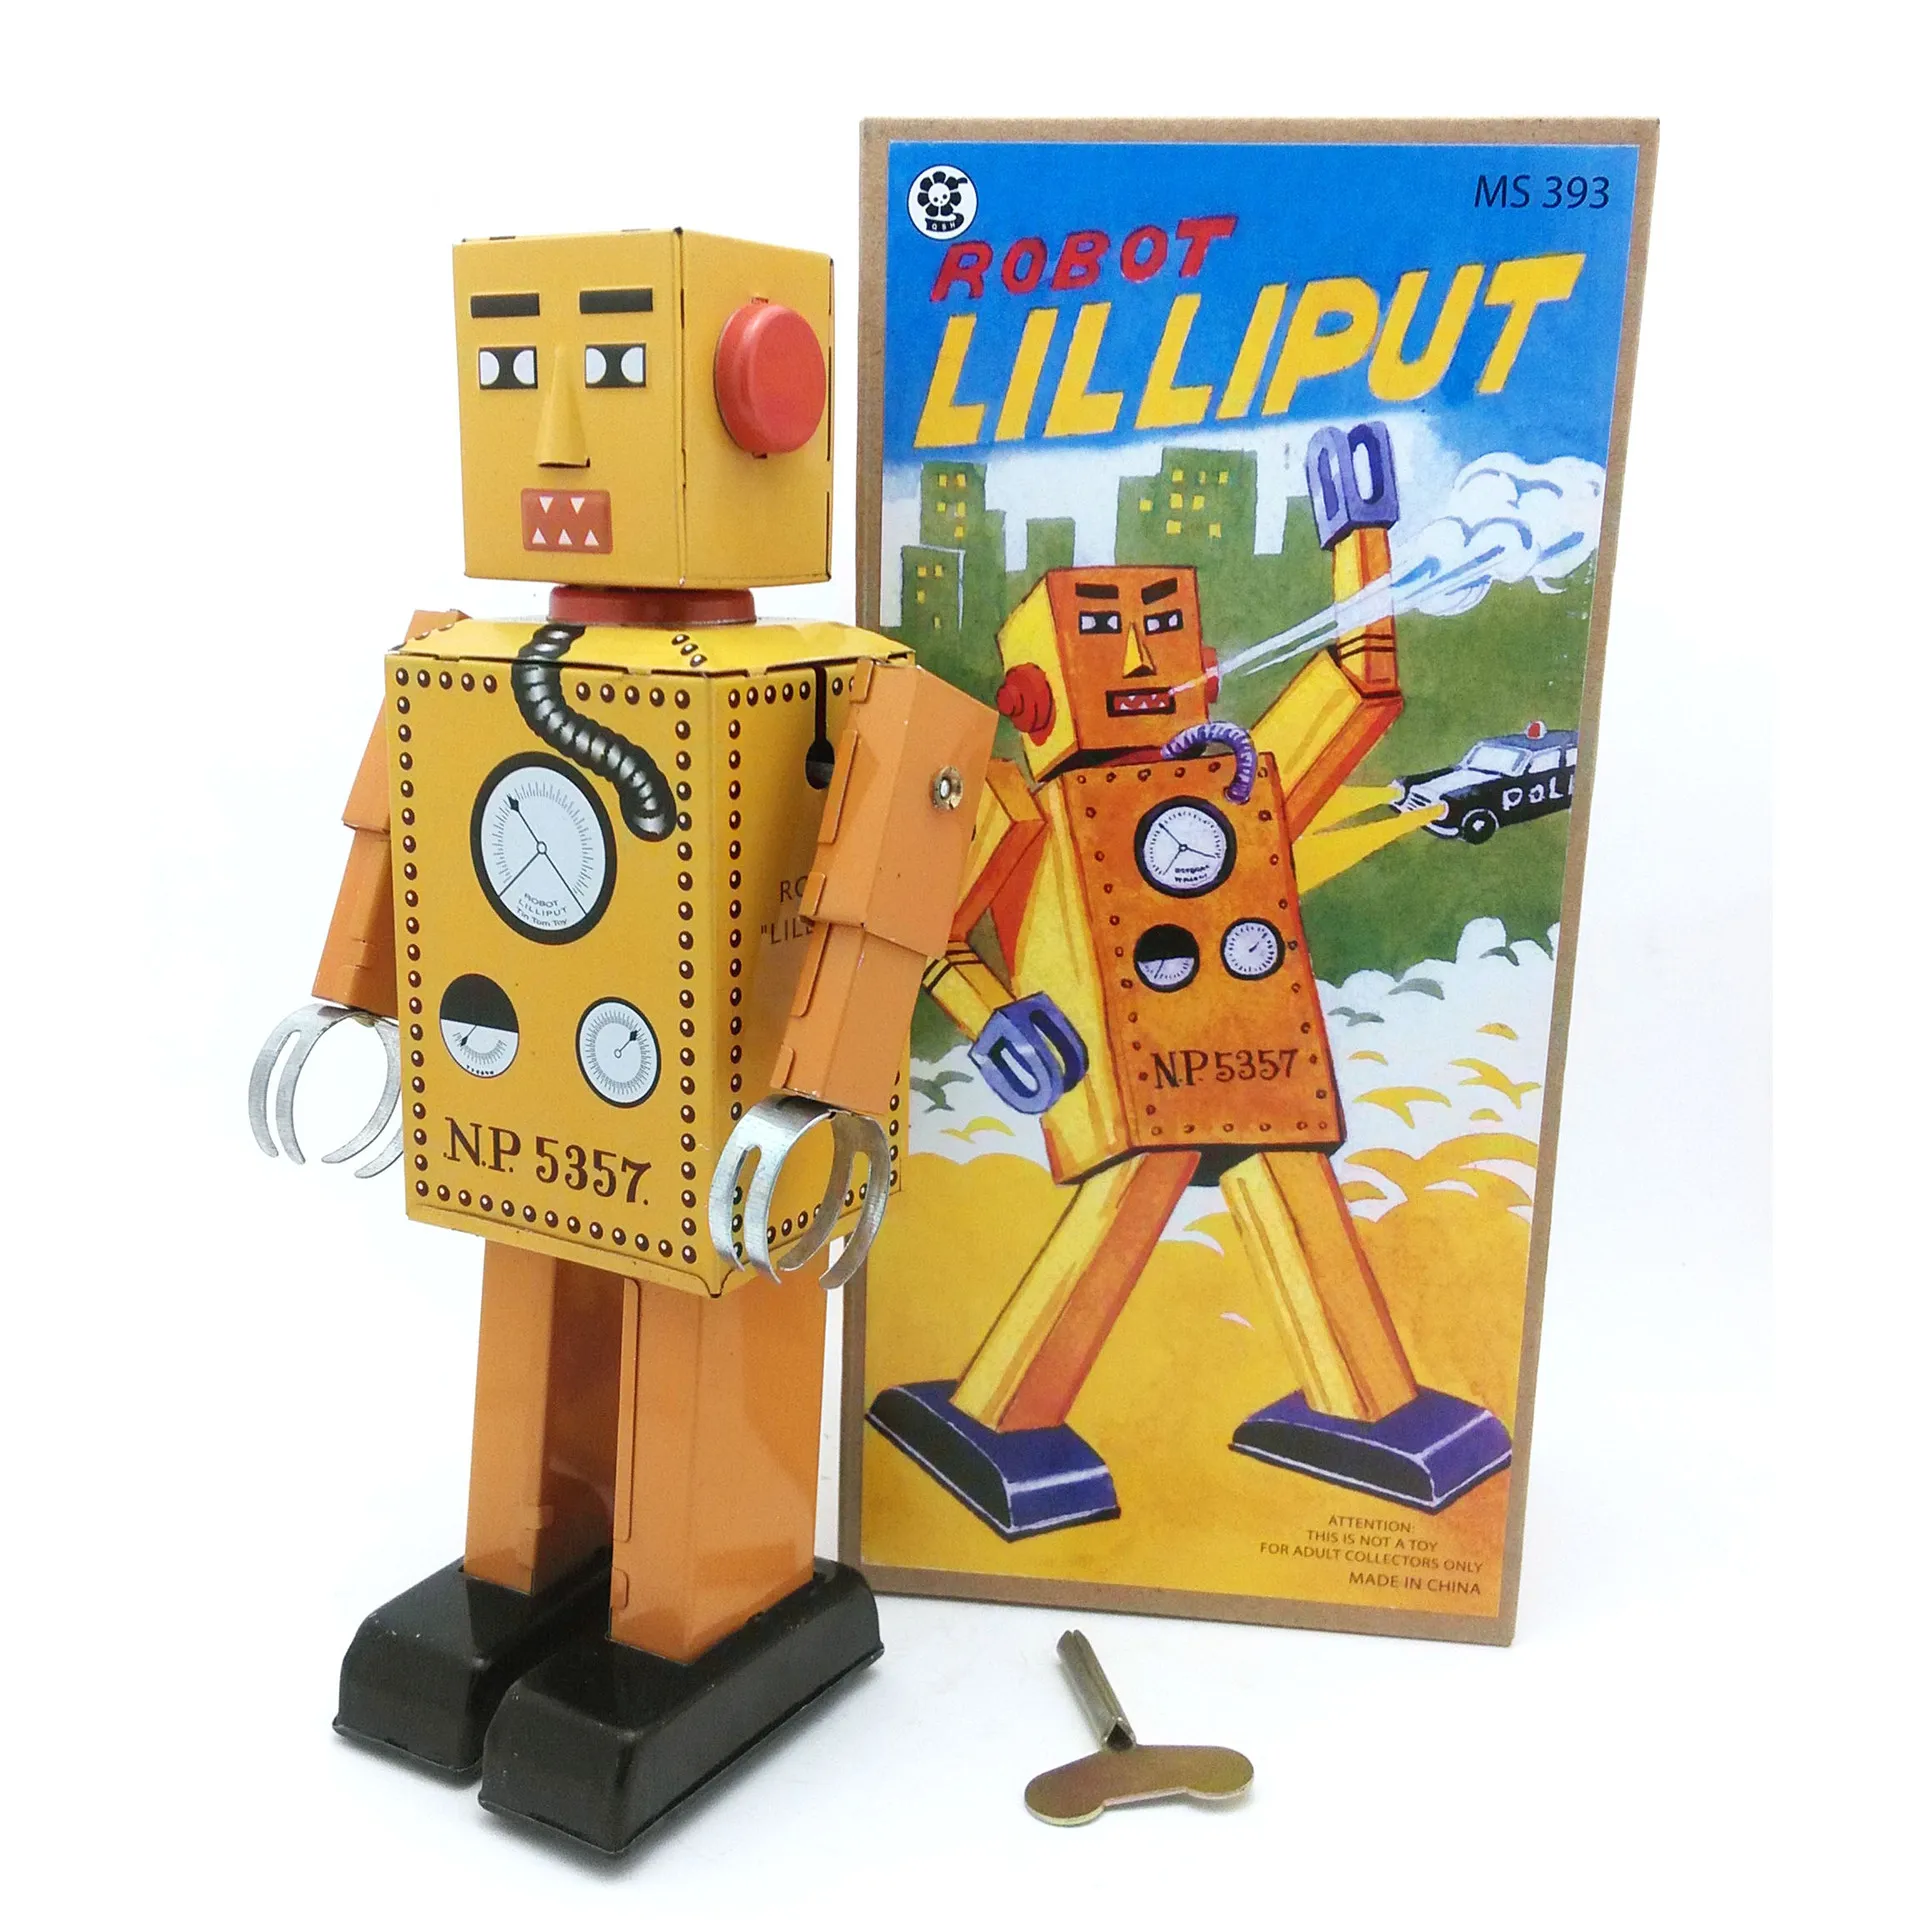 Special　Items　Robot　Edition　Lilliput　Tin　Buy　Toy　Material　Gift　Special　John　Robot　Product　on　Items　Gift　New　ST　Clockwork　Toy　Meta　Edition　Lilliput　John　Tin　Meta　Clockwork　ST　New　Material